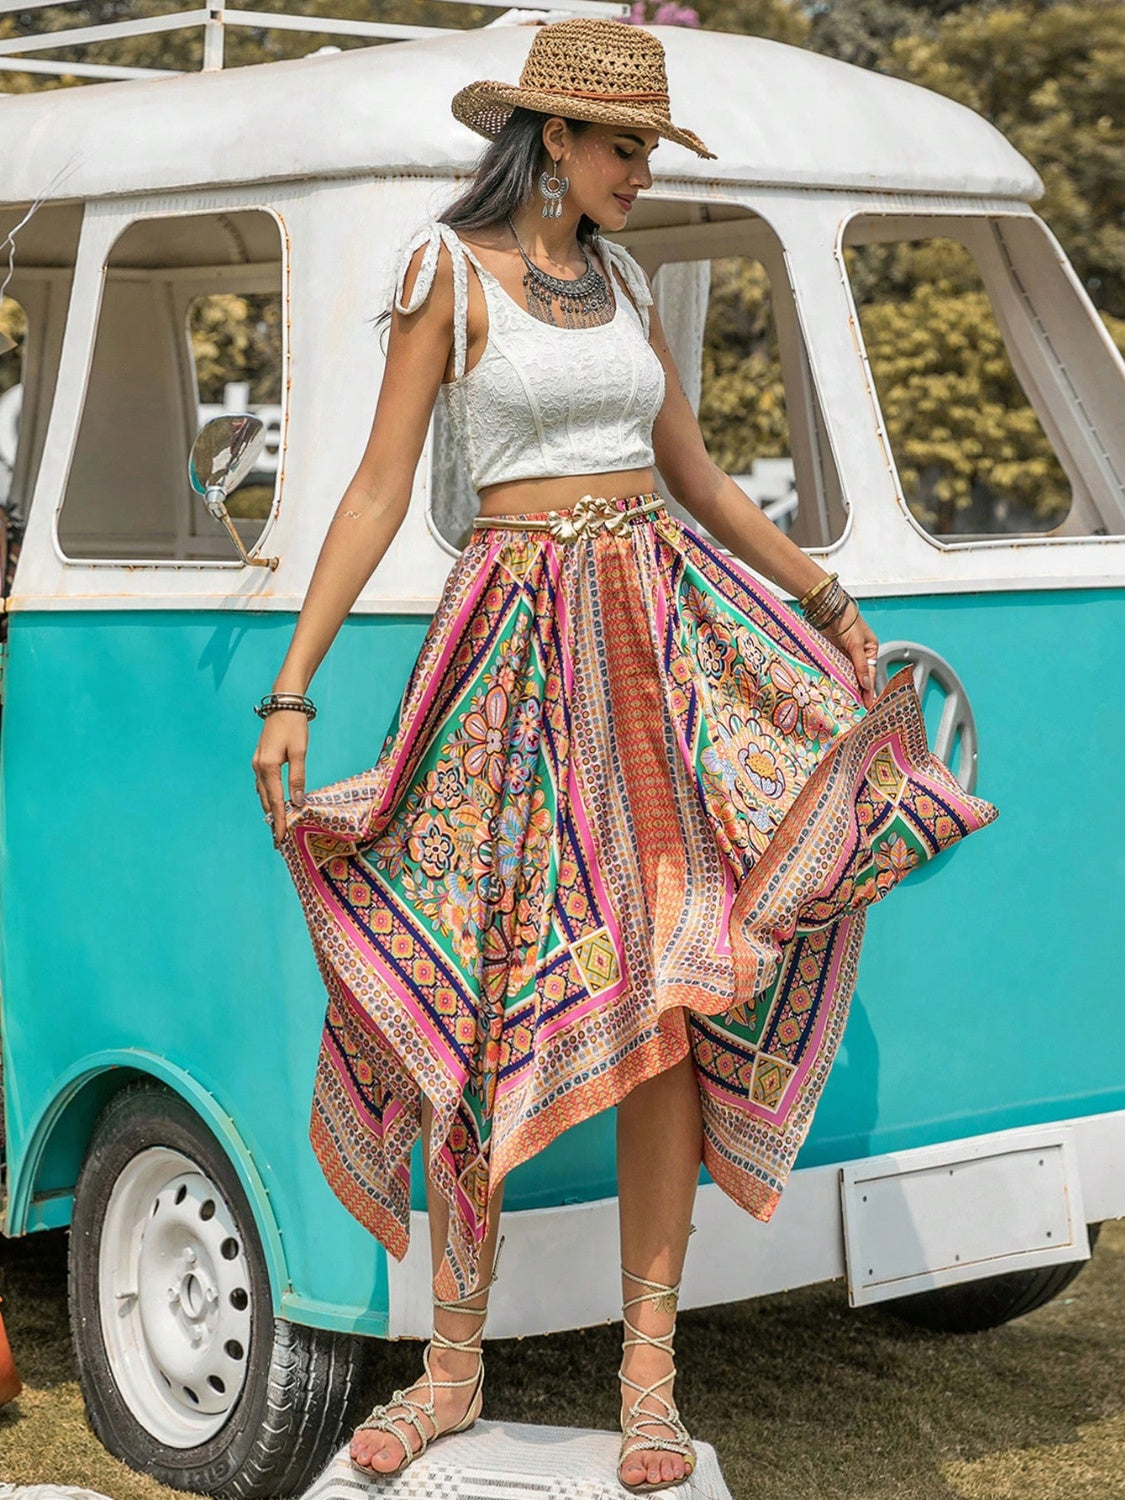 skirt, skirts, boho skirts, boho fashion, festival fashion, hippie clothes, hippie fashion, clothes, summer clothes, clothes for the spring, vacation clothes, nice clothes, trending fashion, outfit ideas, nice clothes, flowy skirts, cheap clothes, cheap skirts, kesley boutique